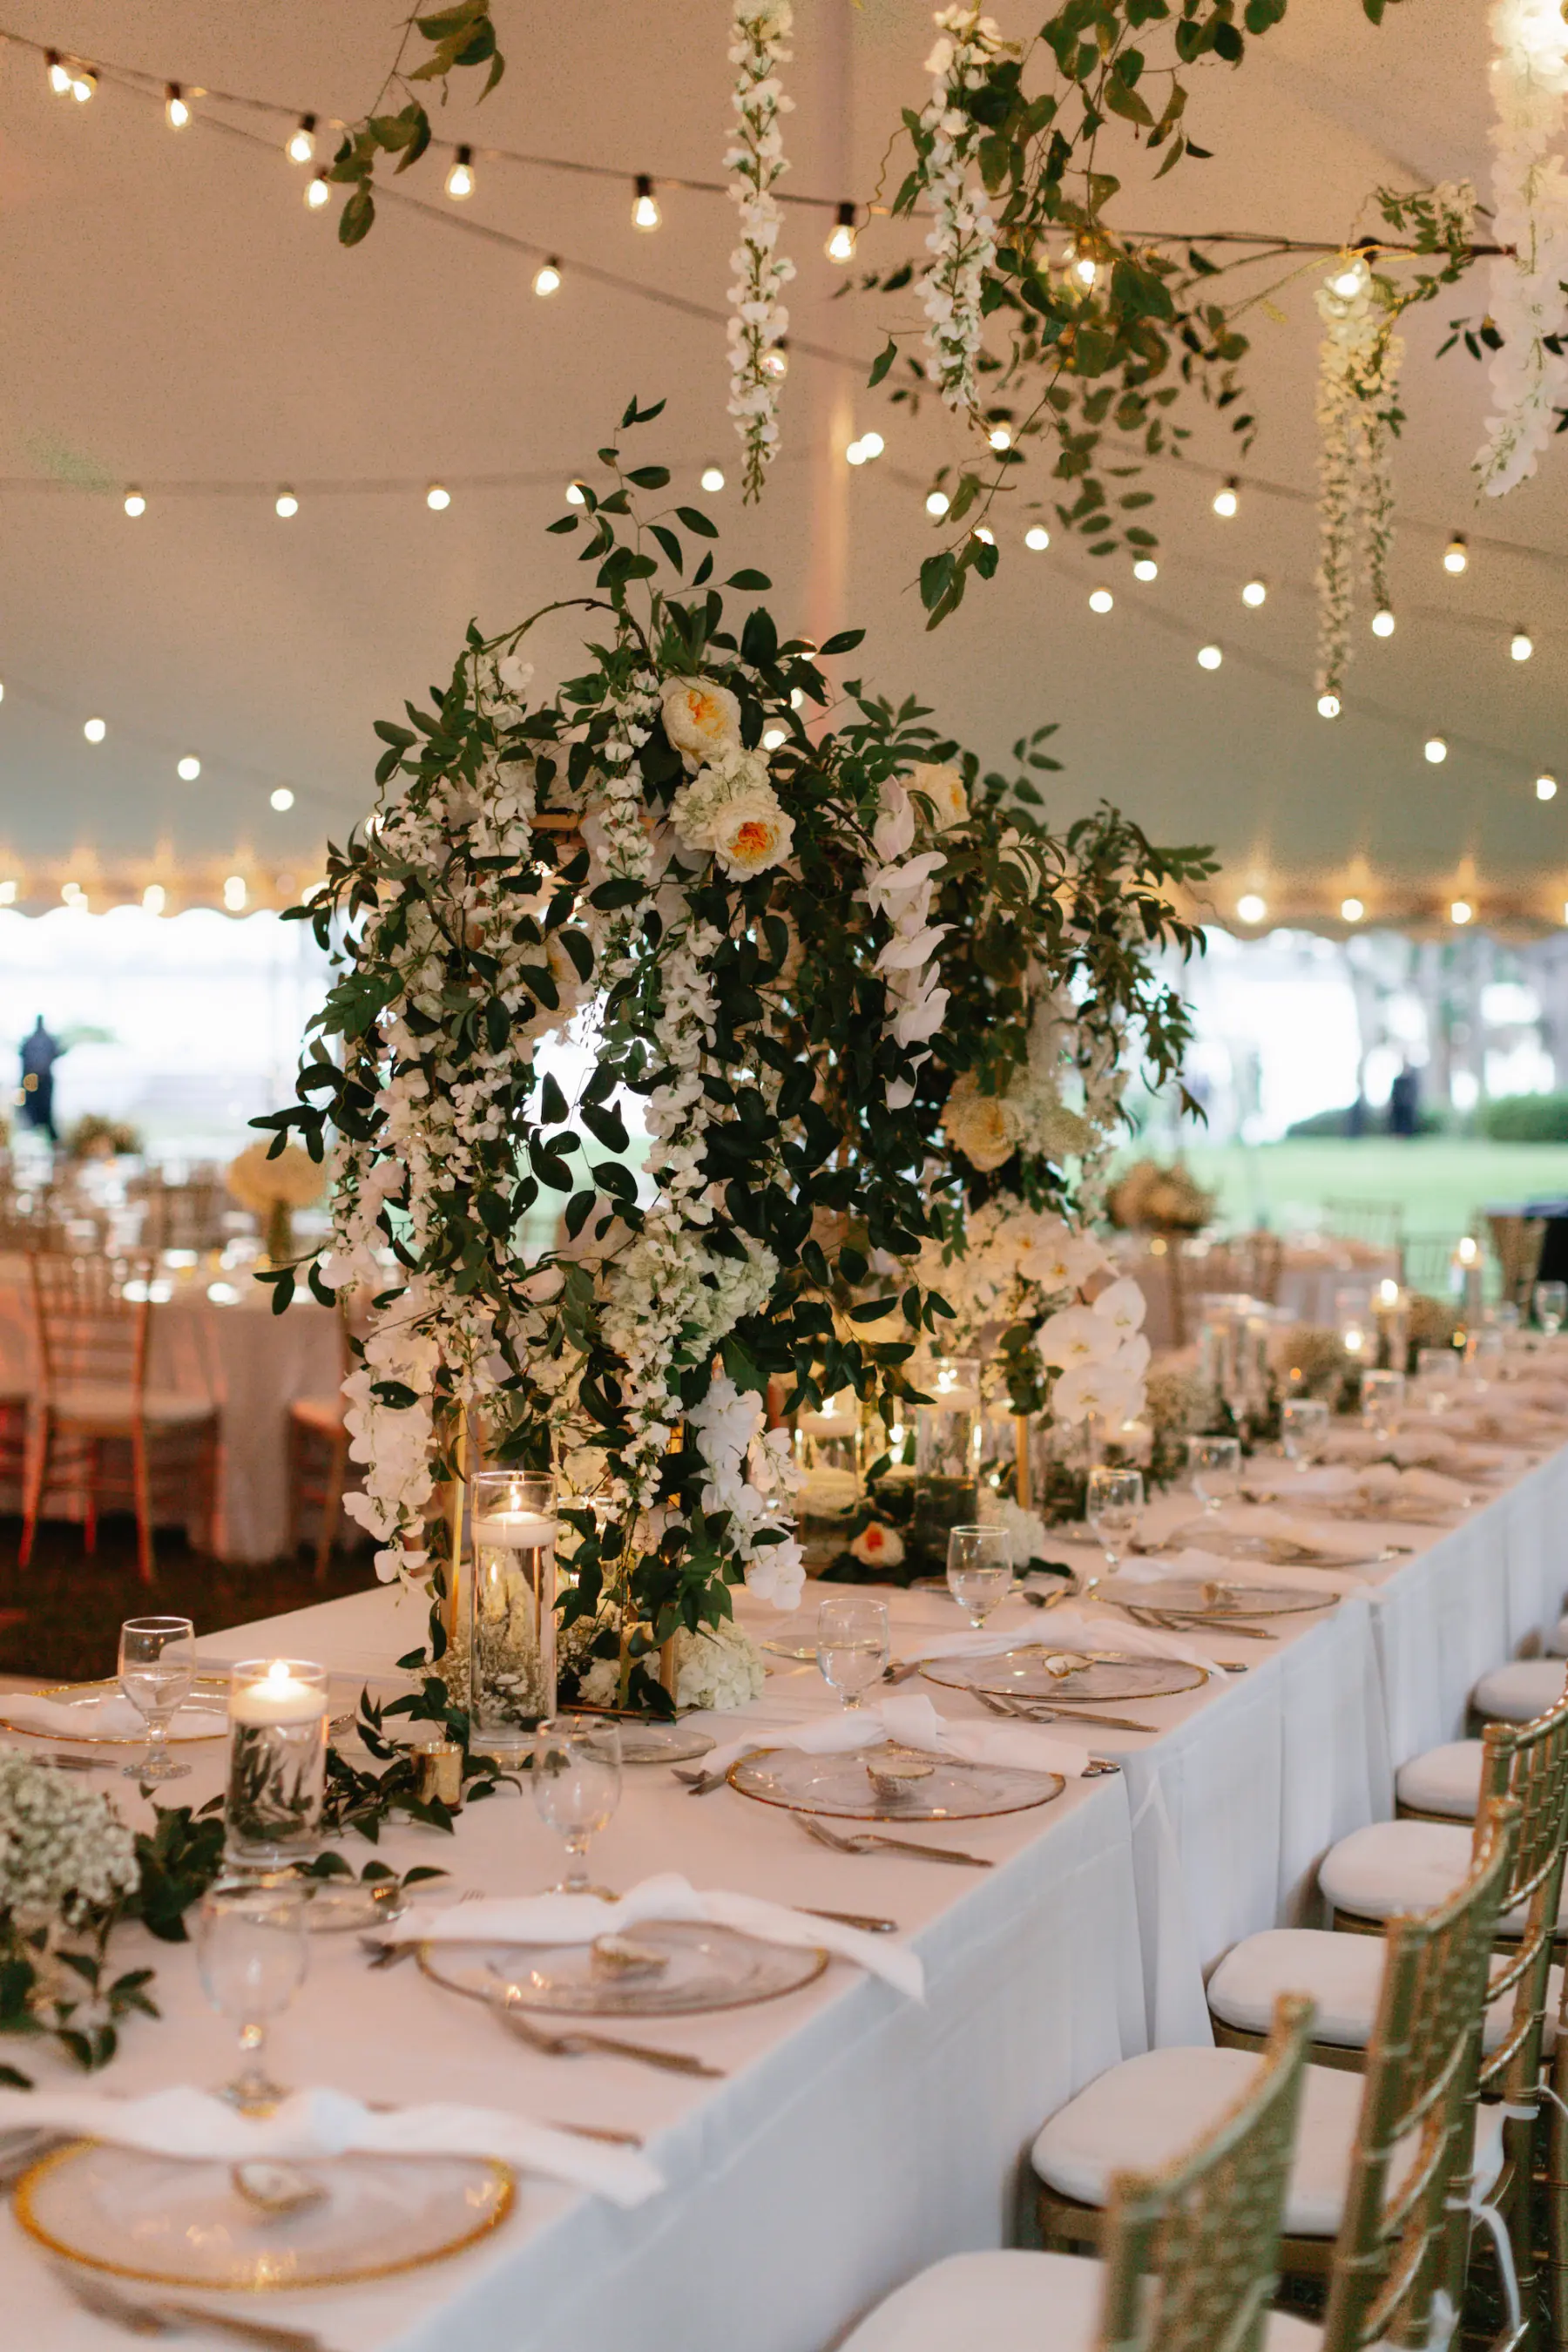 Whimsical White and Gold Wedding Reception Tablescape with White Roes, Orchids, Greenery, and Wisteria | Tampa Bay Florist Beneva Florals